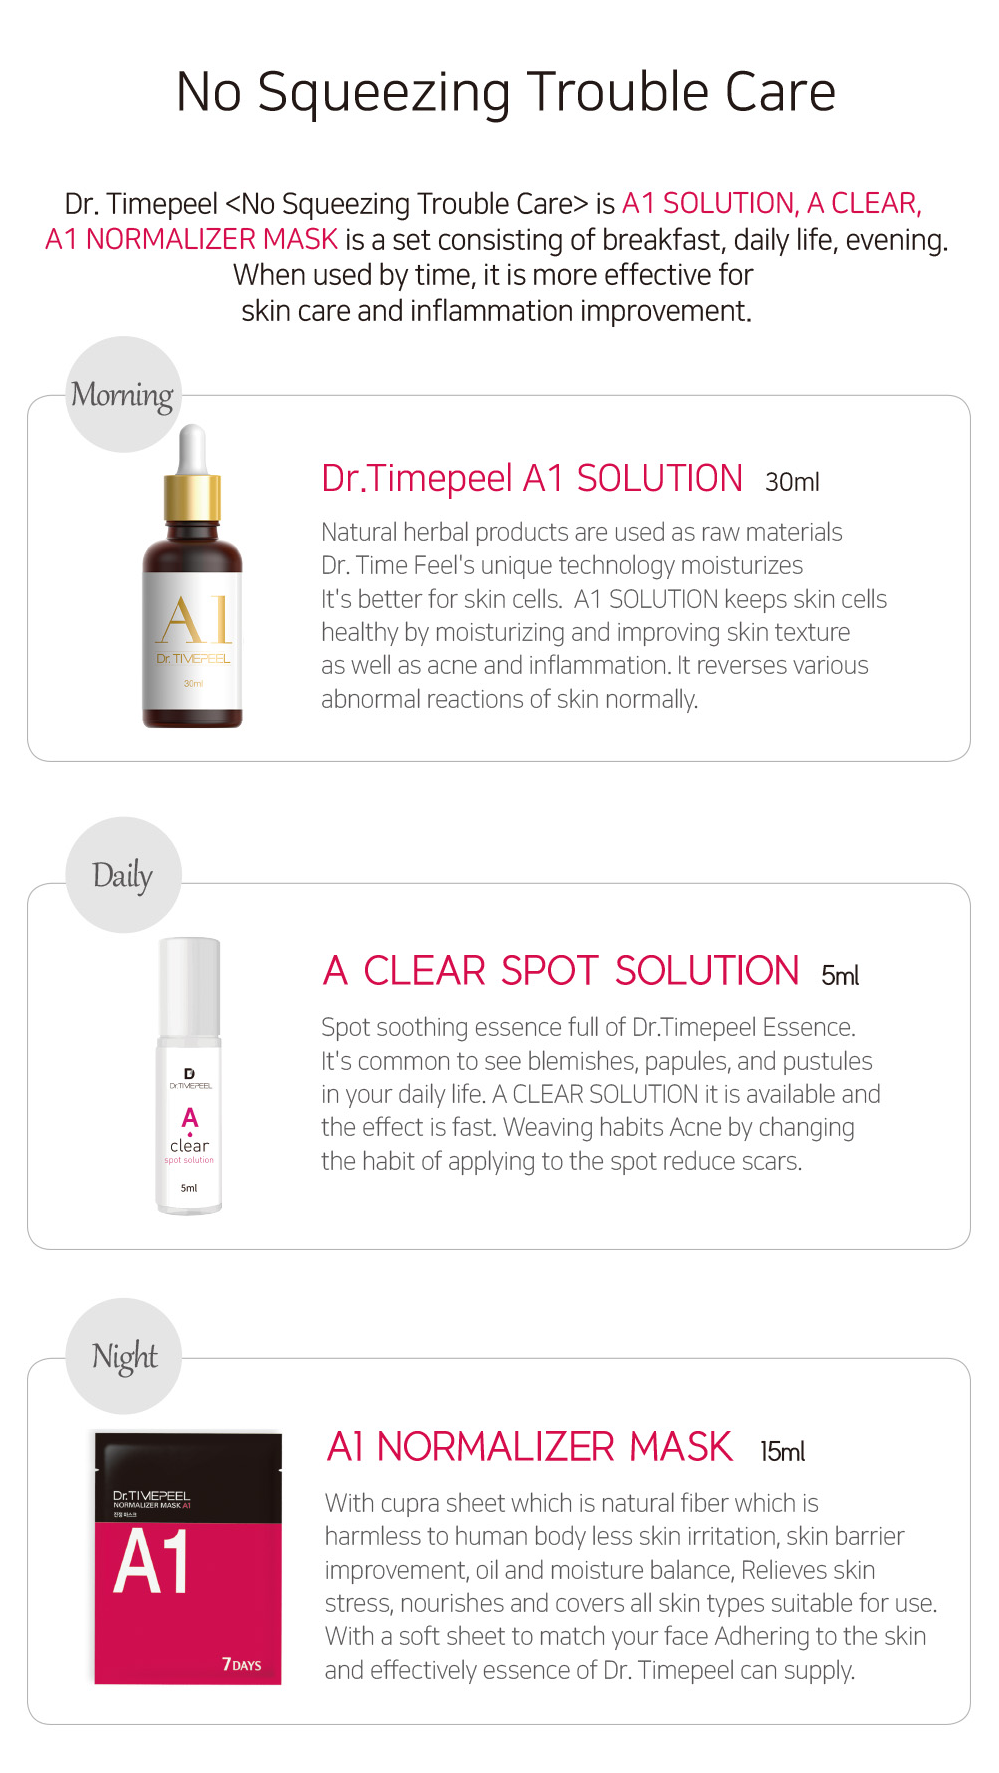 Dr. Timepeel Daily Routine - Dr. Timepeel A1 Solution,  A Clear Spot Solution, A1 Normalizer Mask